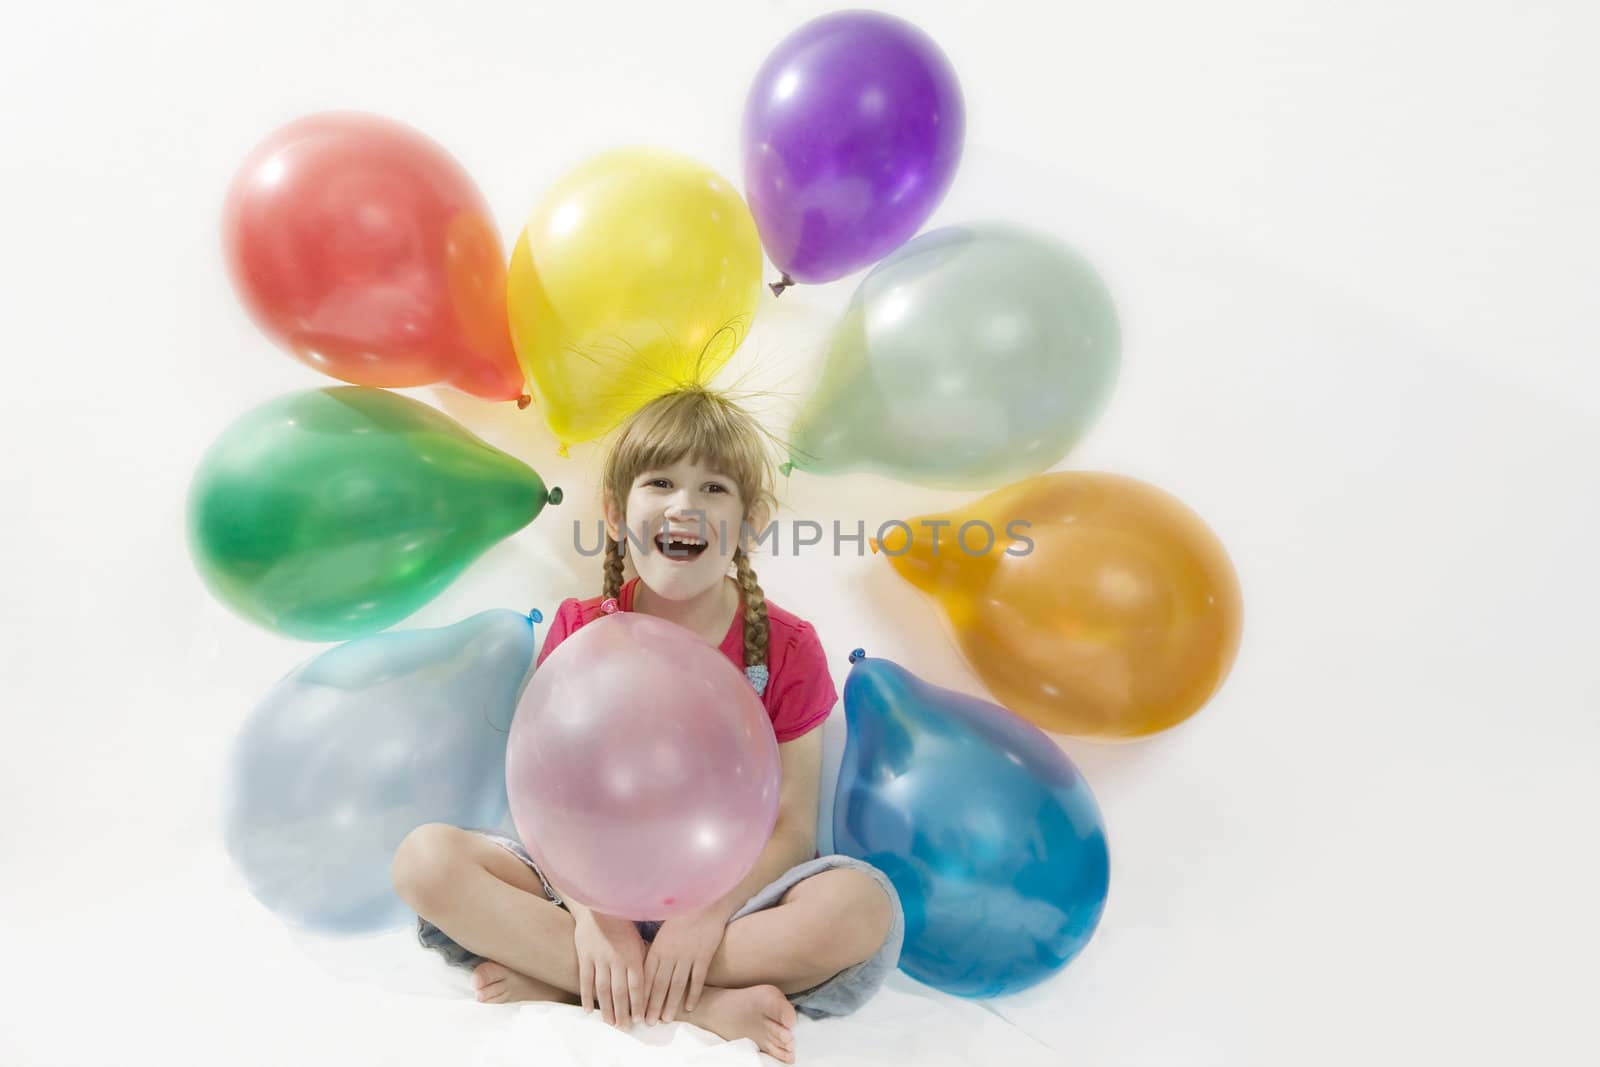 little happy giggle girl sitting with colour balloons. Girl celebrated her birthday. Isolated